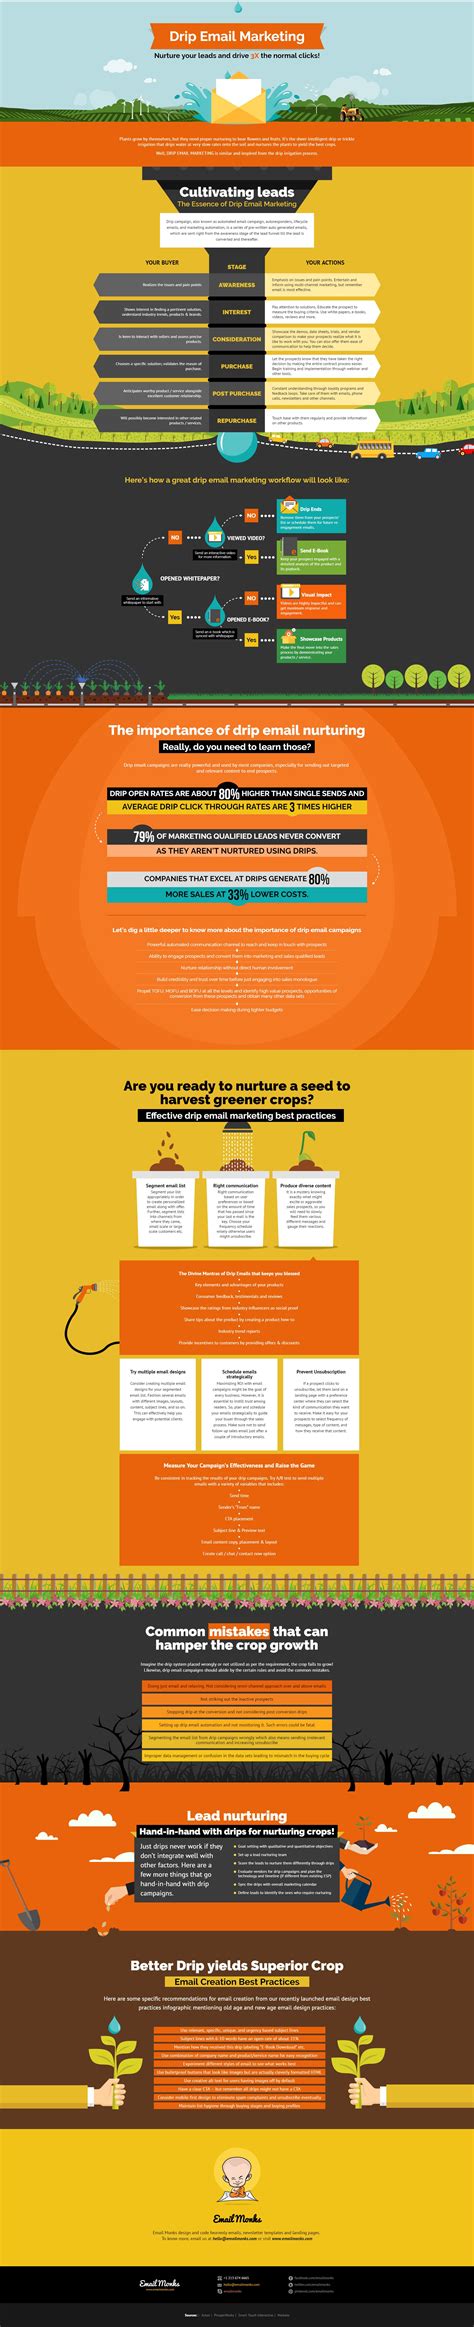 Drip Email Marketingemailmonks Email Drip Campaign Infographic